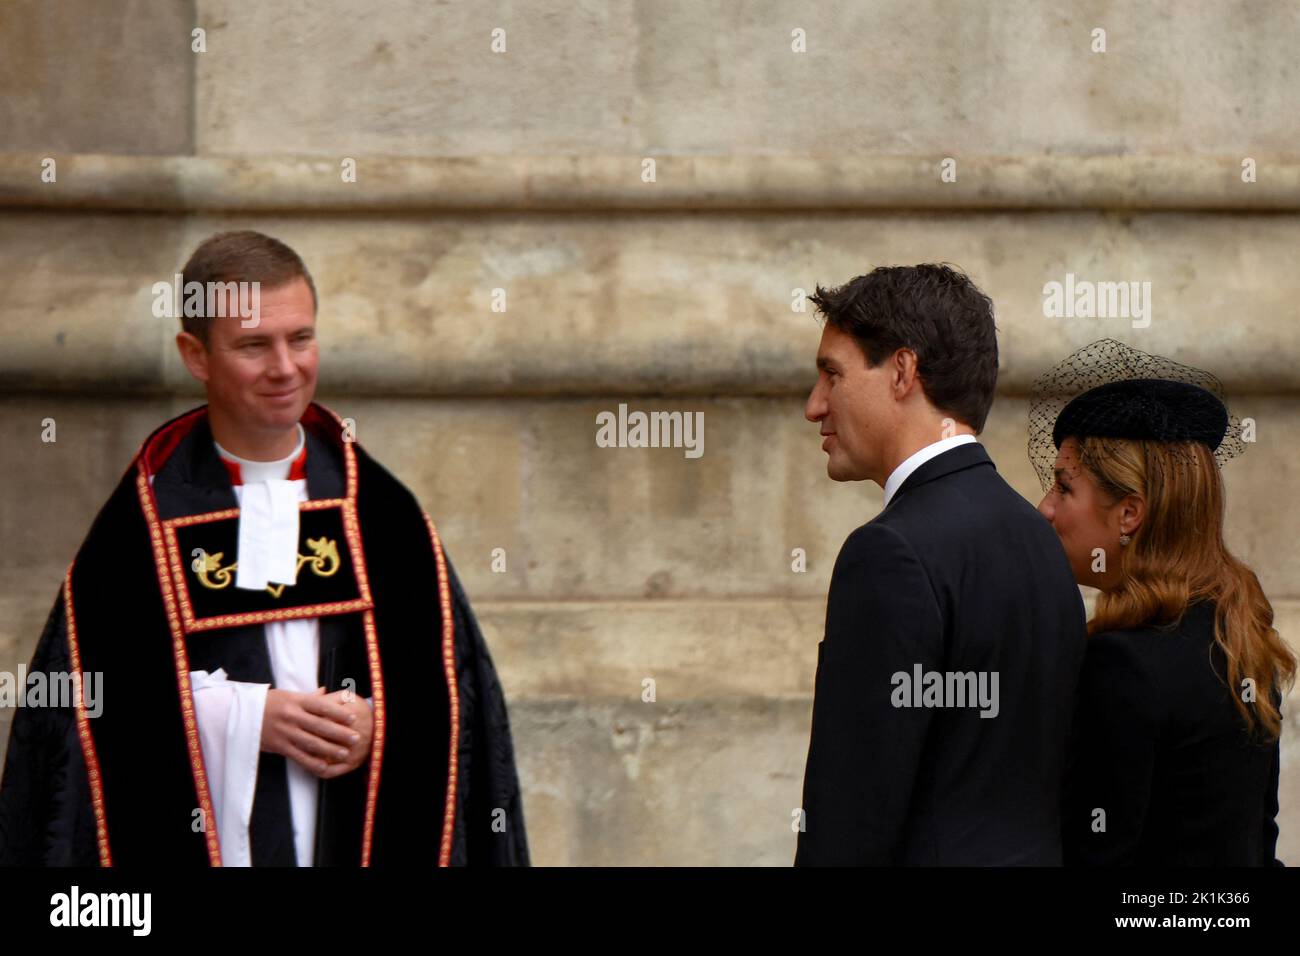 Canada's Prime Minister Justin Trudeau arrives at Westminster Abbey on the day of the state funeral and burial of Britain's Queen Elizabeth, in London, Britain, September 19, 2022.  REUTERS/Kai Pfaffenbach Stock Photo